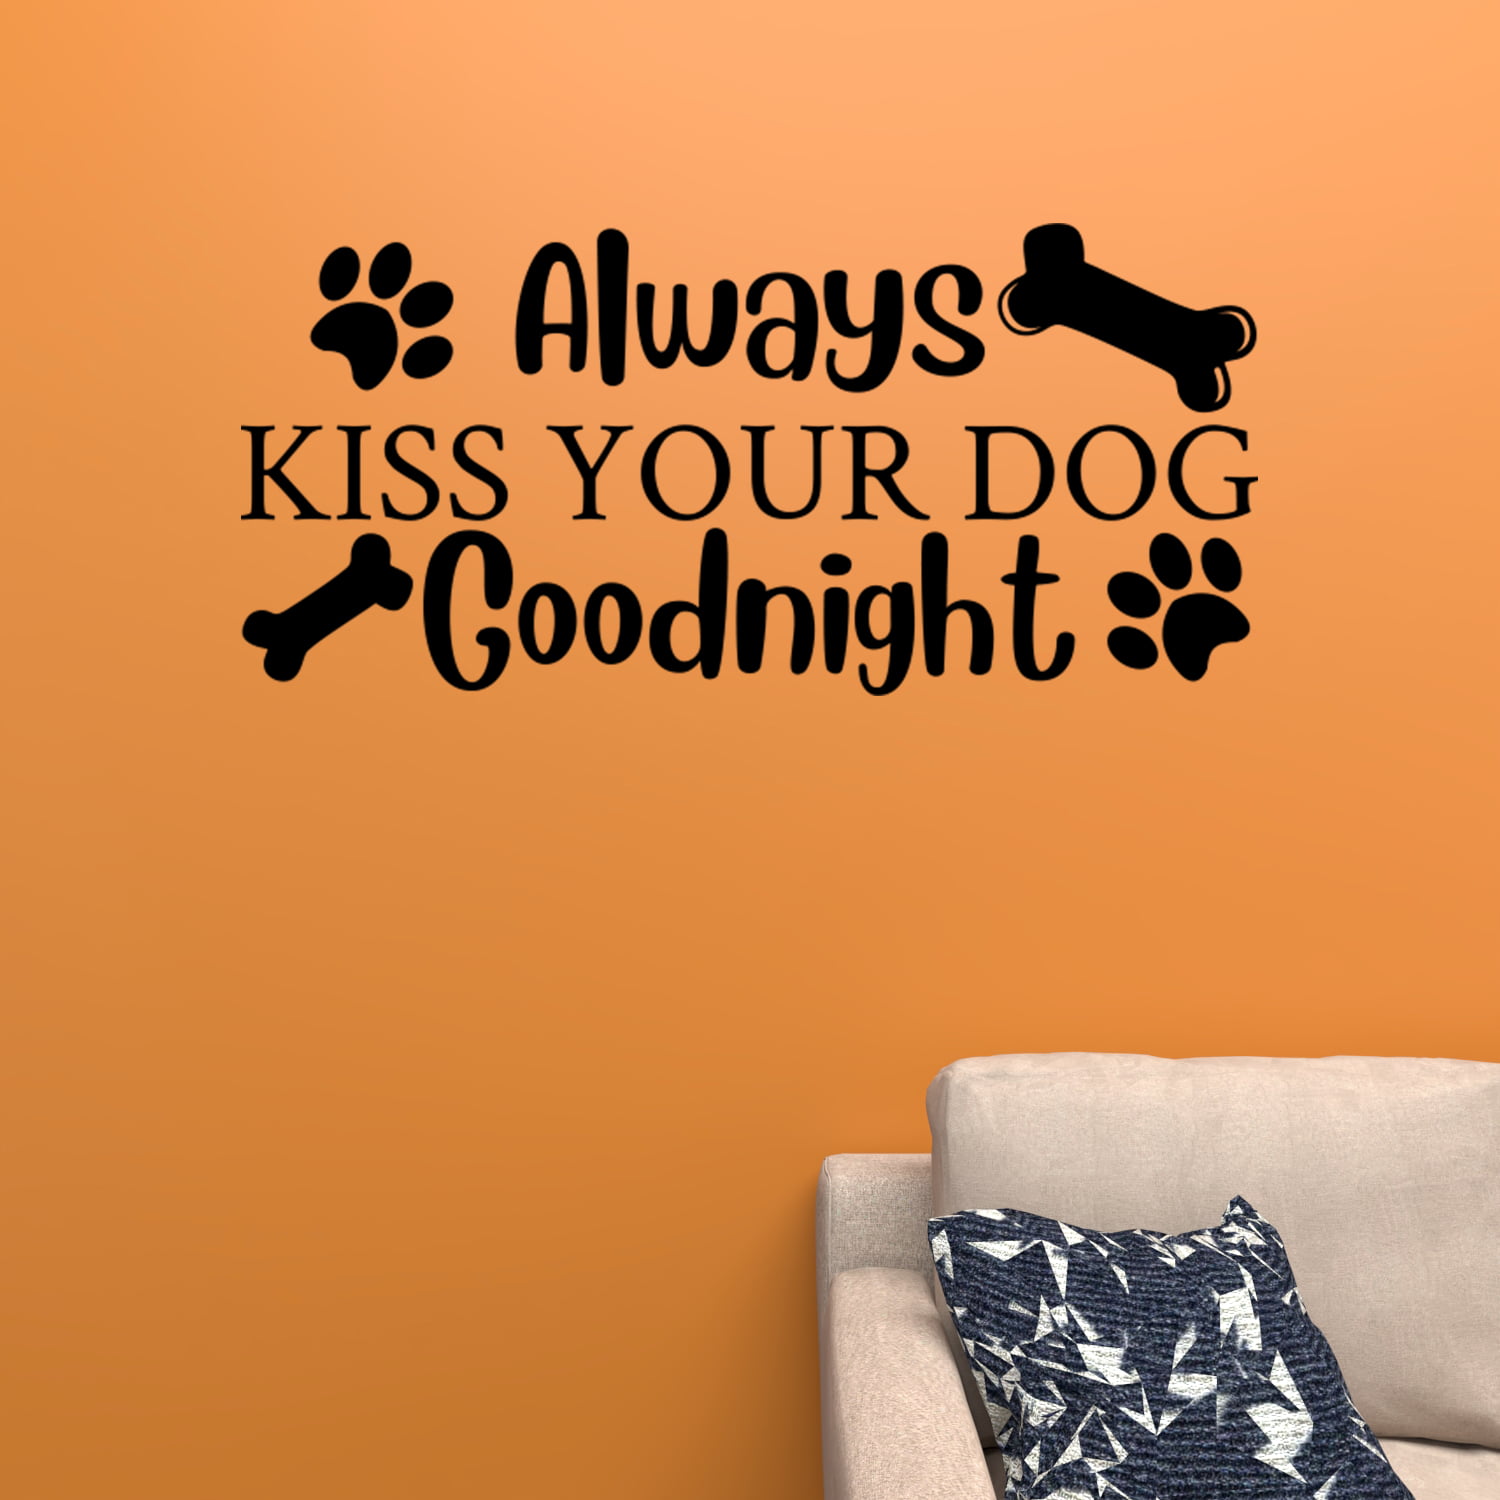 Always Kiss Your Dog Goodnight .Wall Decals Vinyl Wall Art Lettering Home Decor 